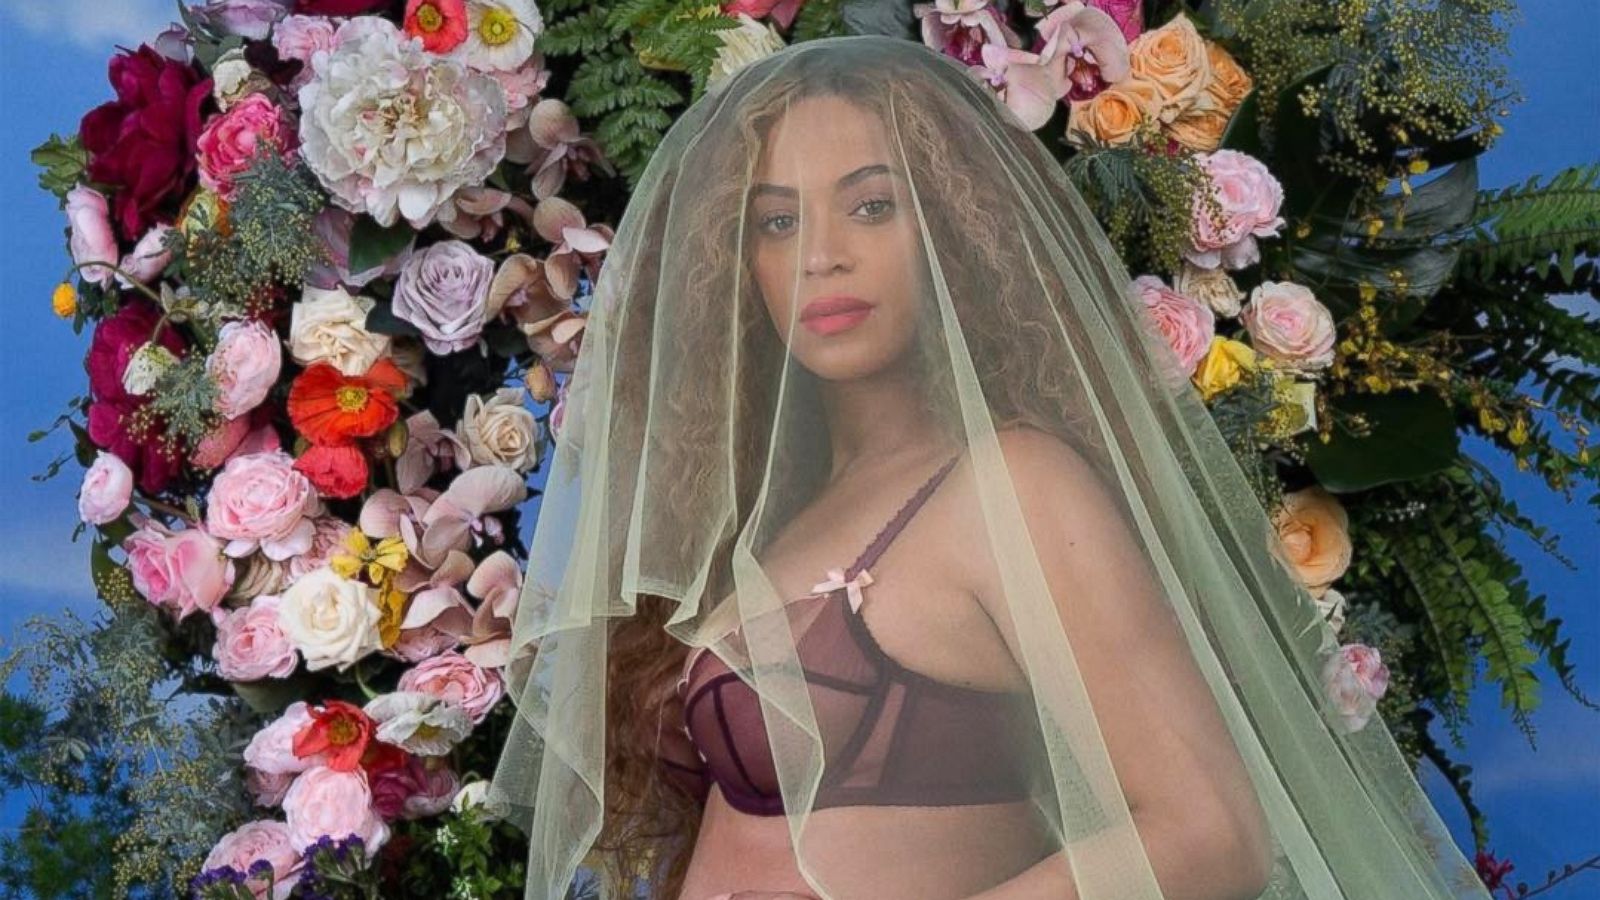 Why Beyonce May Have Used Instagram to Announce Her Pregnancy - ABC News